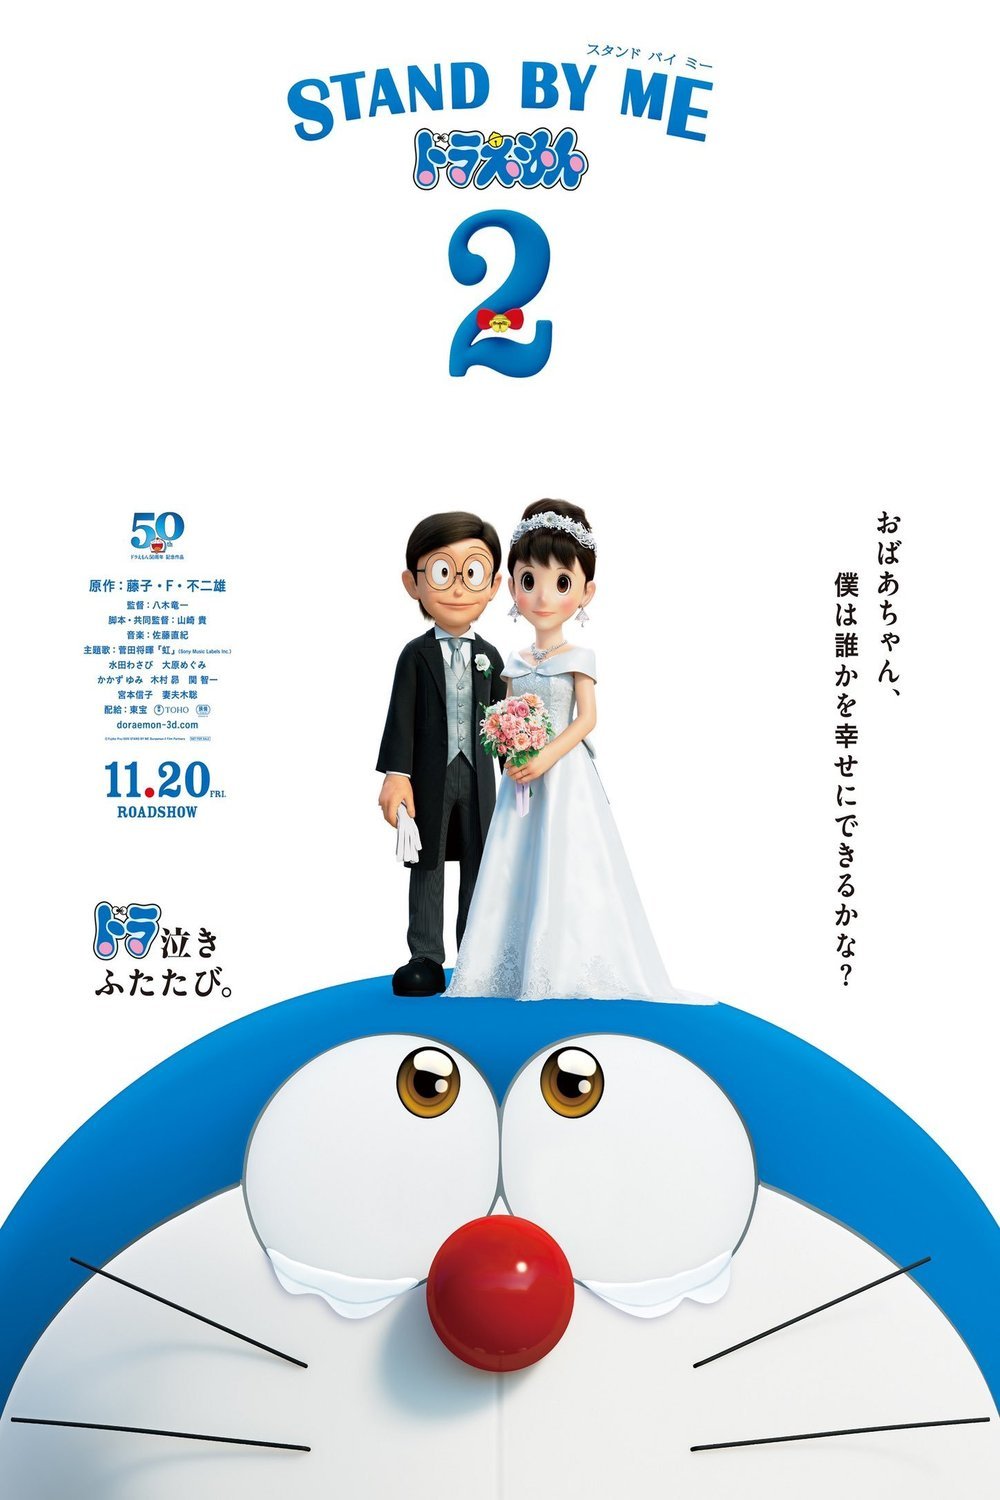 Japanese poster of the movie Stand by Me Doraemon2